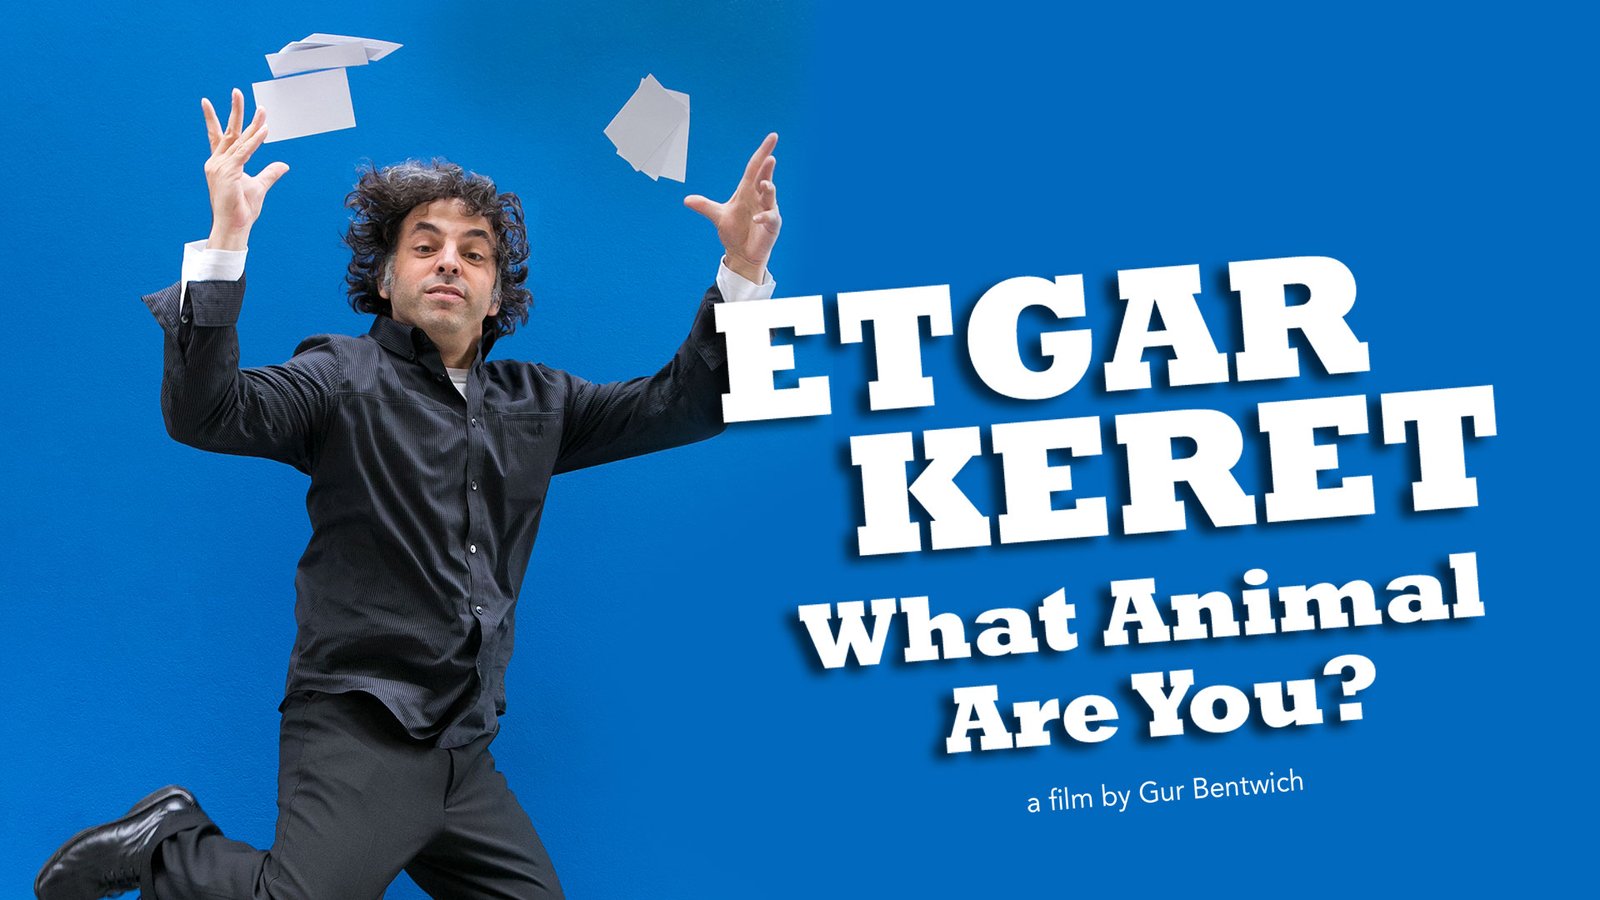 Etgar Keret: What Animal Are You? - Portrait of Renowned Israeli Writer